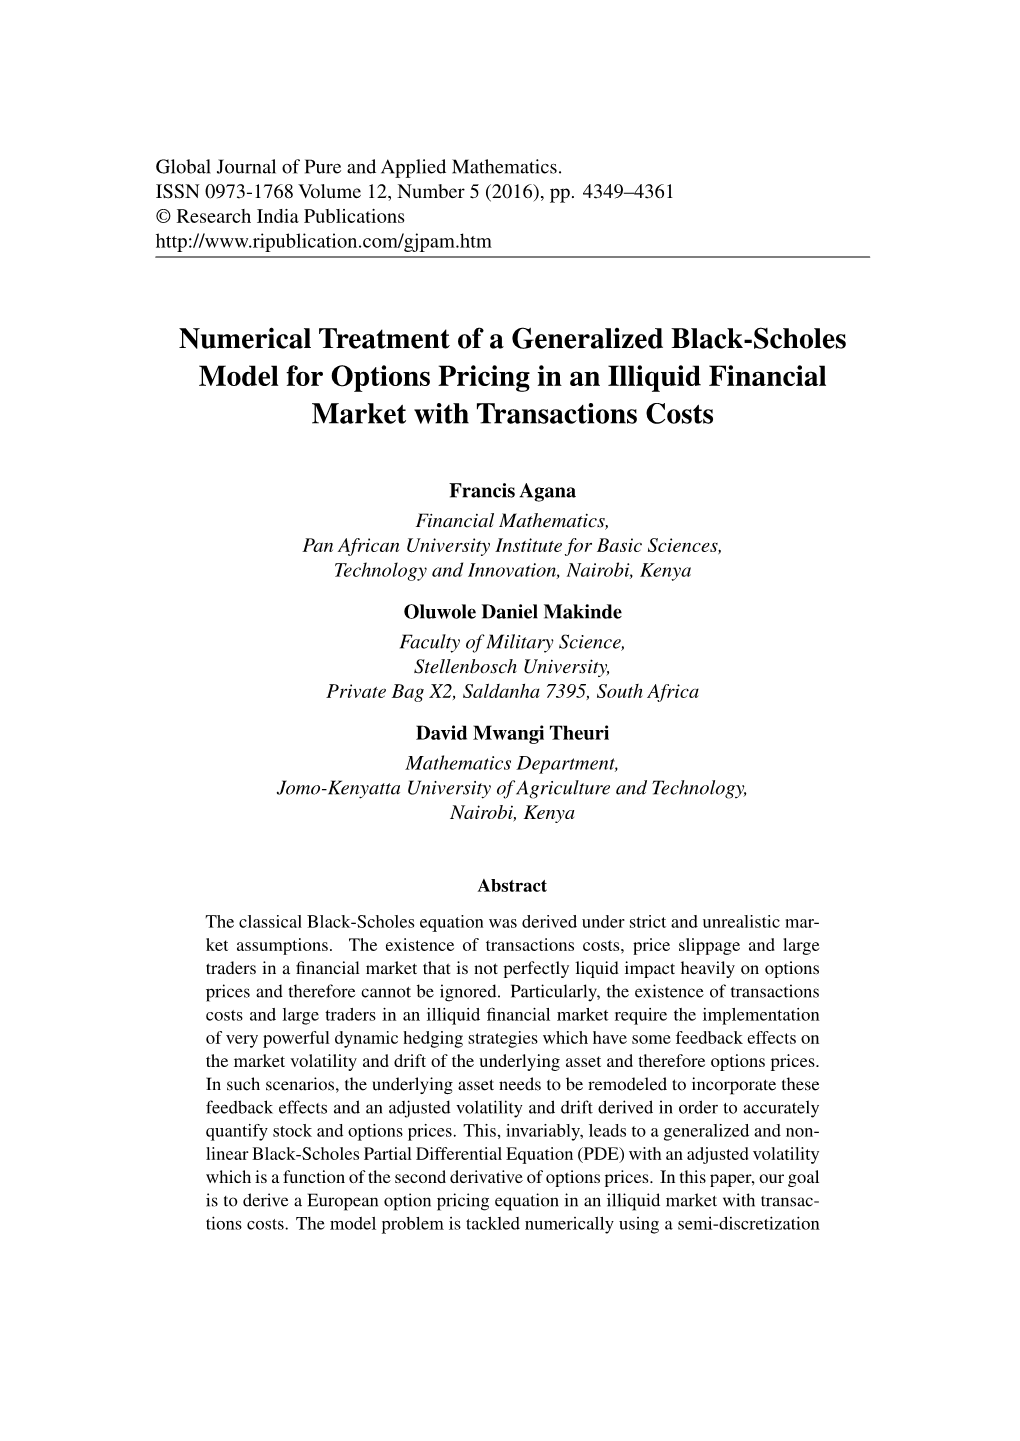 Numerical Treatment of a Generalized Black-Scholes Model for Options Pricing in an Illiquid Financial Market with Transactions Costs